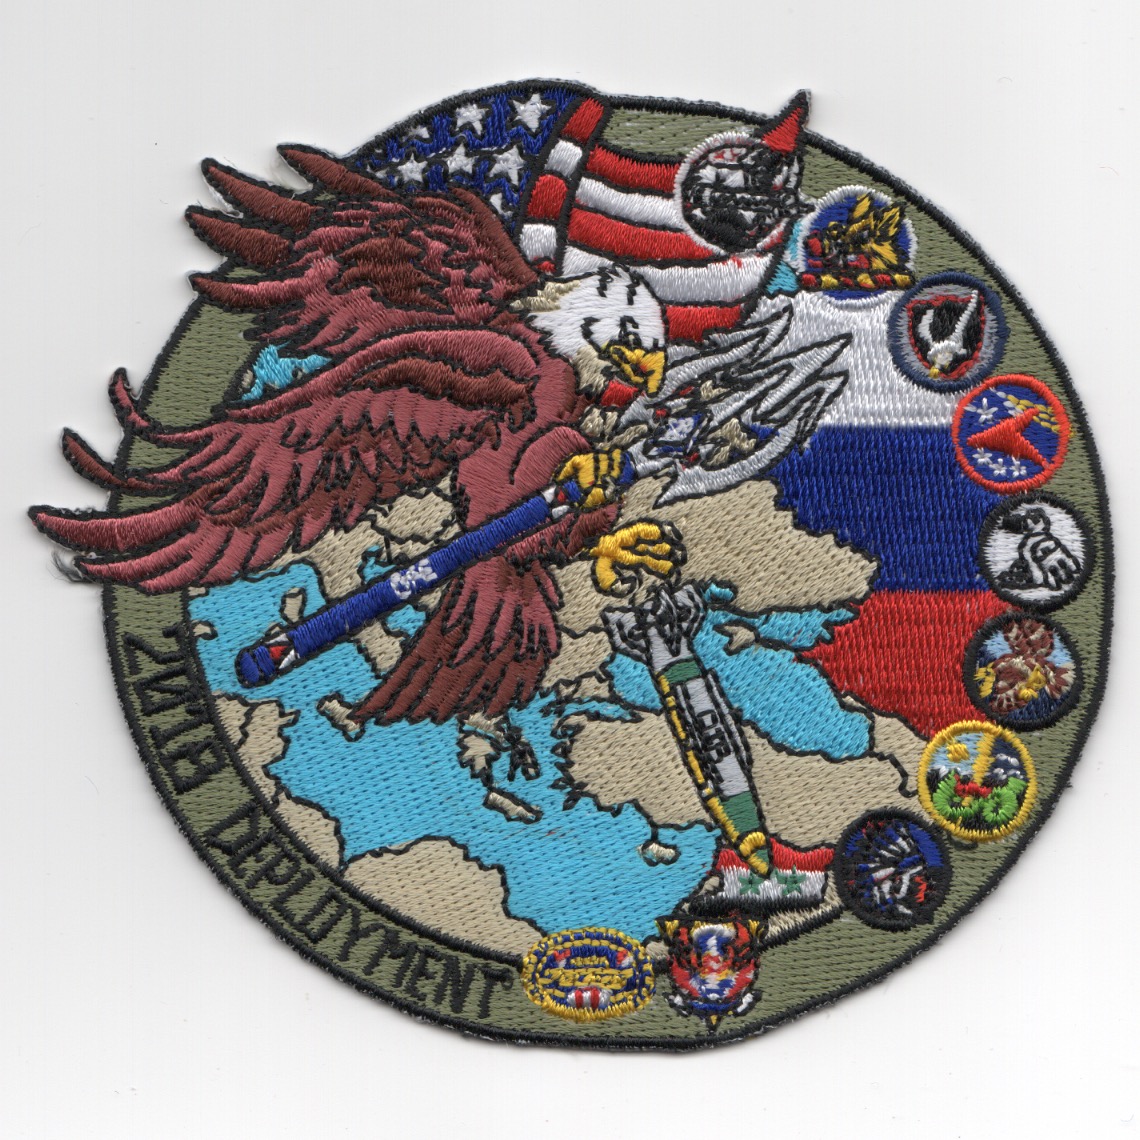 VFA-11 '2018 GAGGLE' Cruise Patch